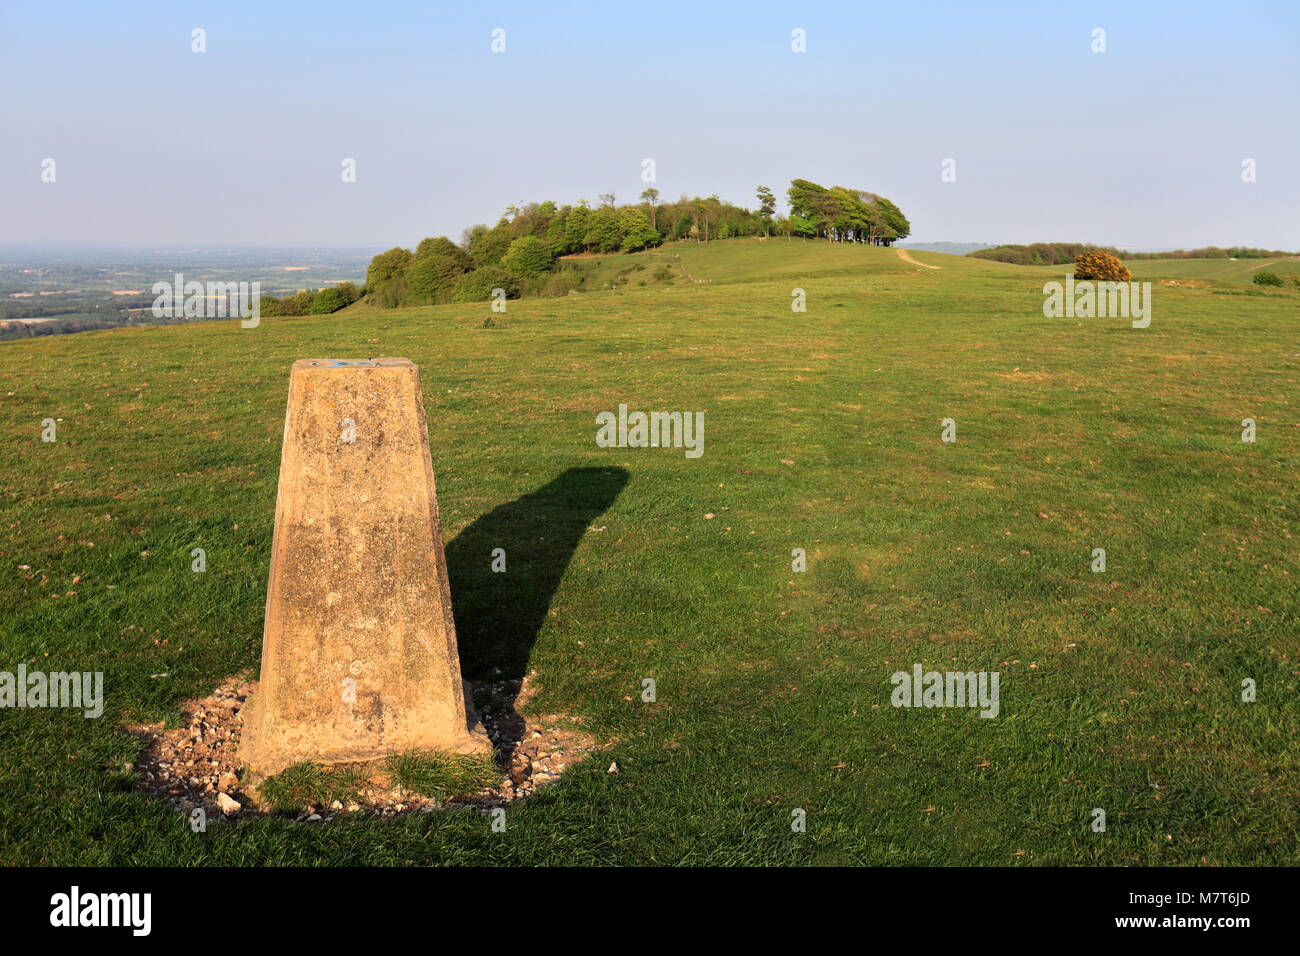 Ordinance Survey Trig Point, Chanctonbury Ring, South Downs National Park, Sussex, England, UK Stock Photo